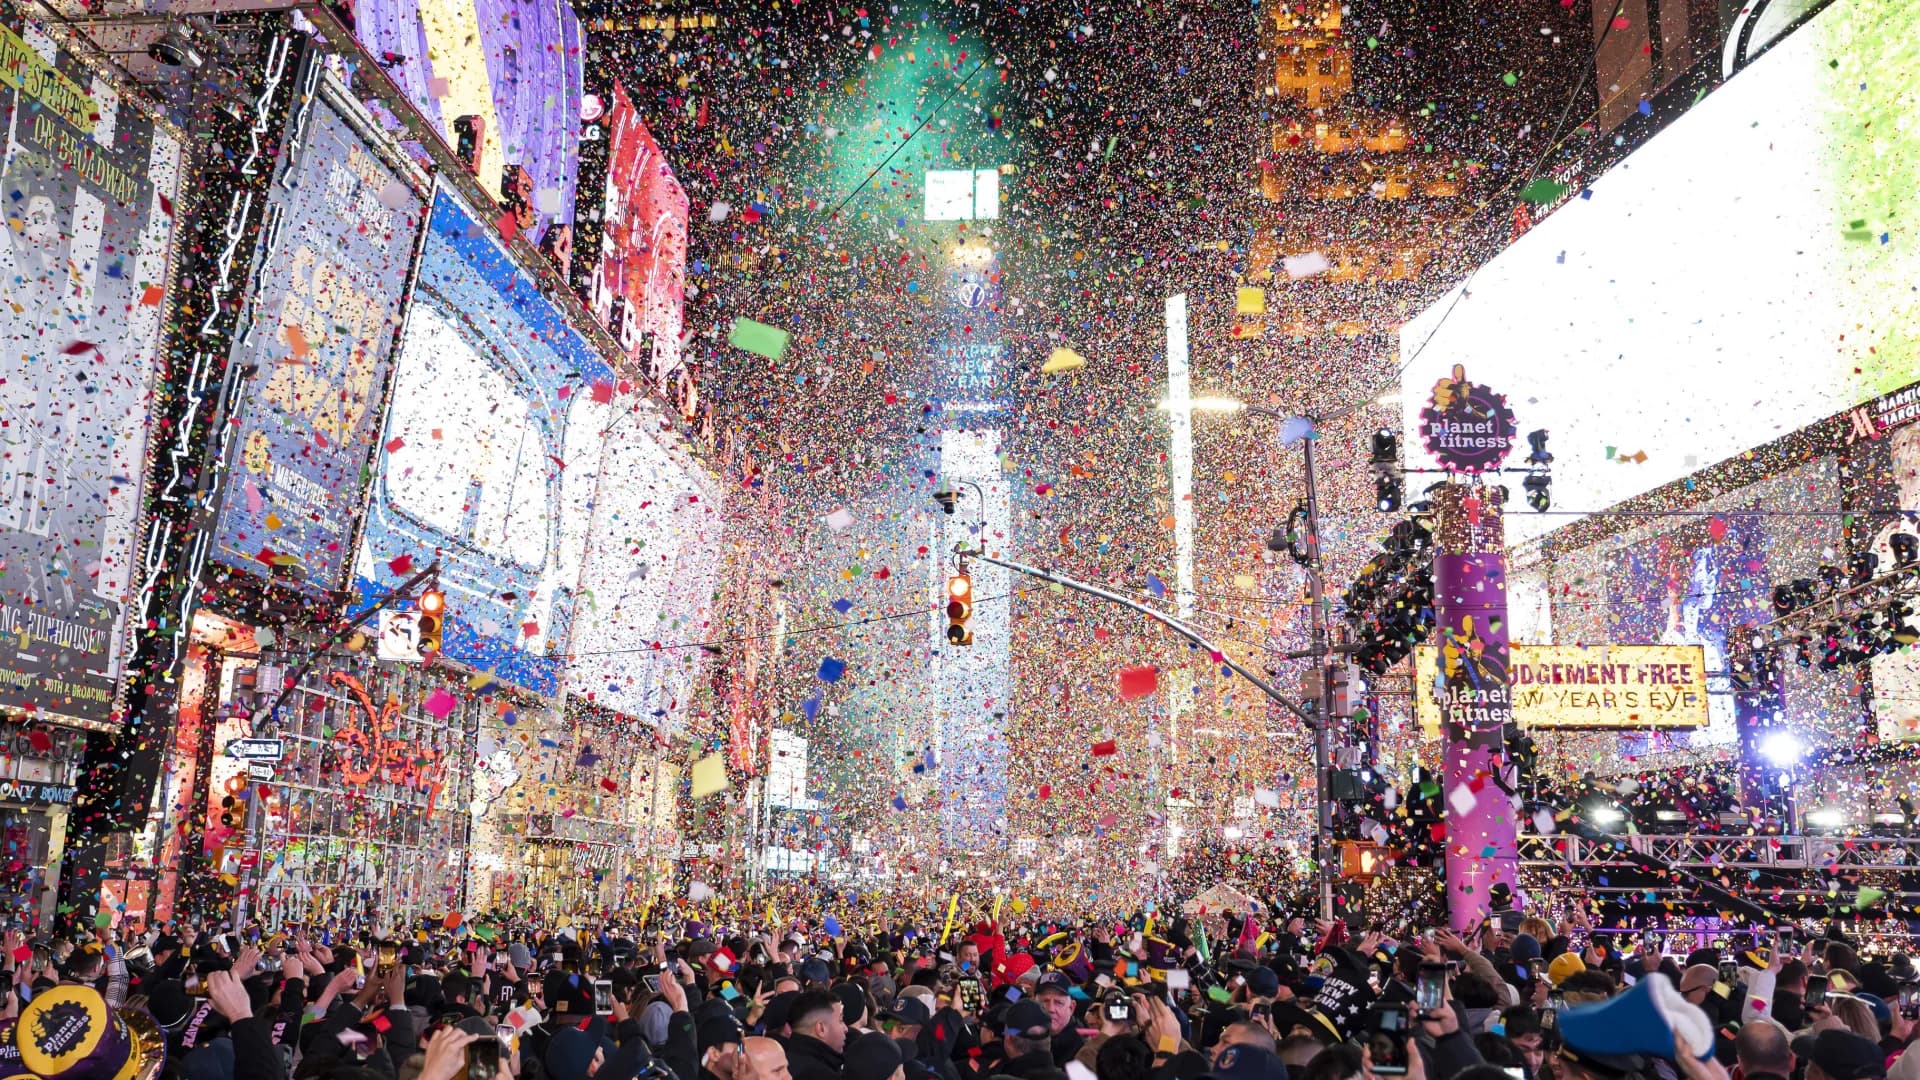 Mayor: Decision on Times Square New Year's Eve celebration to be made by Christmas